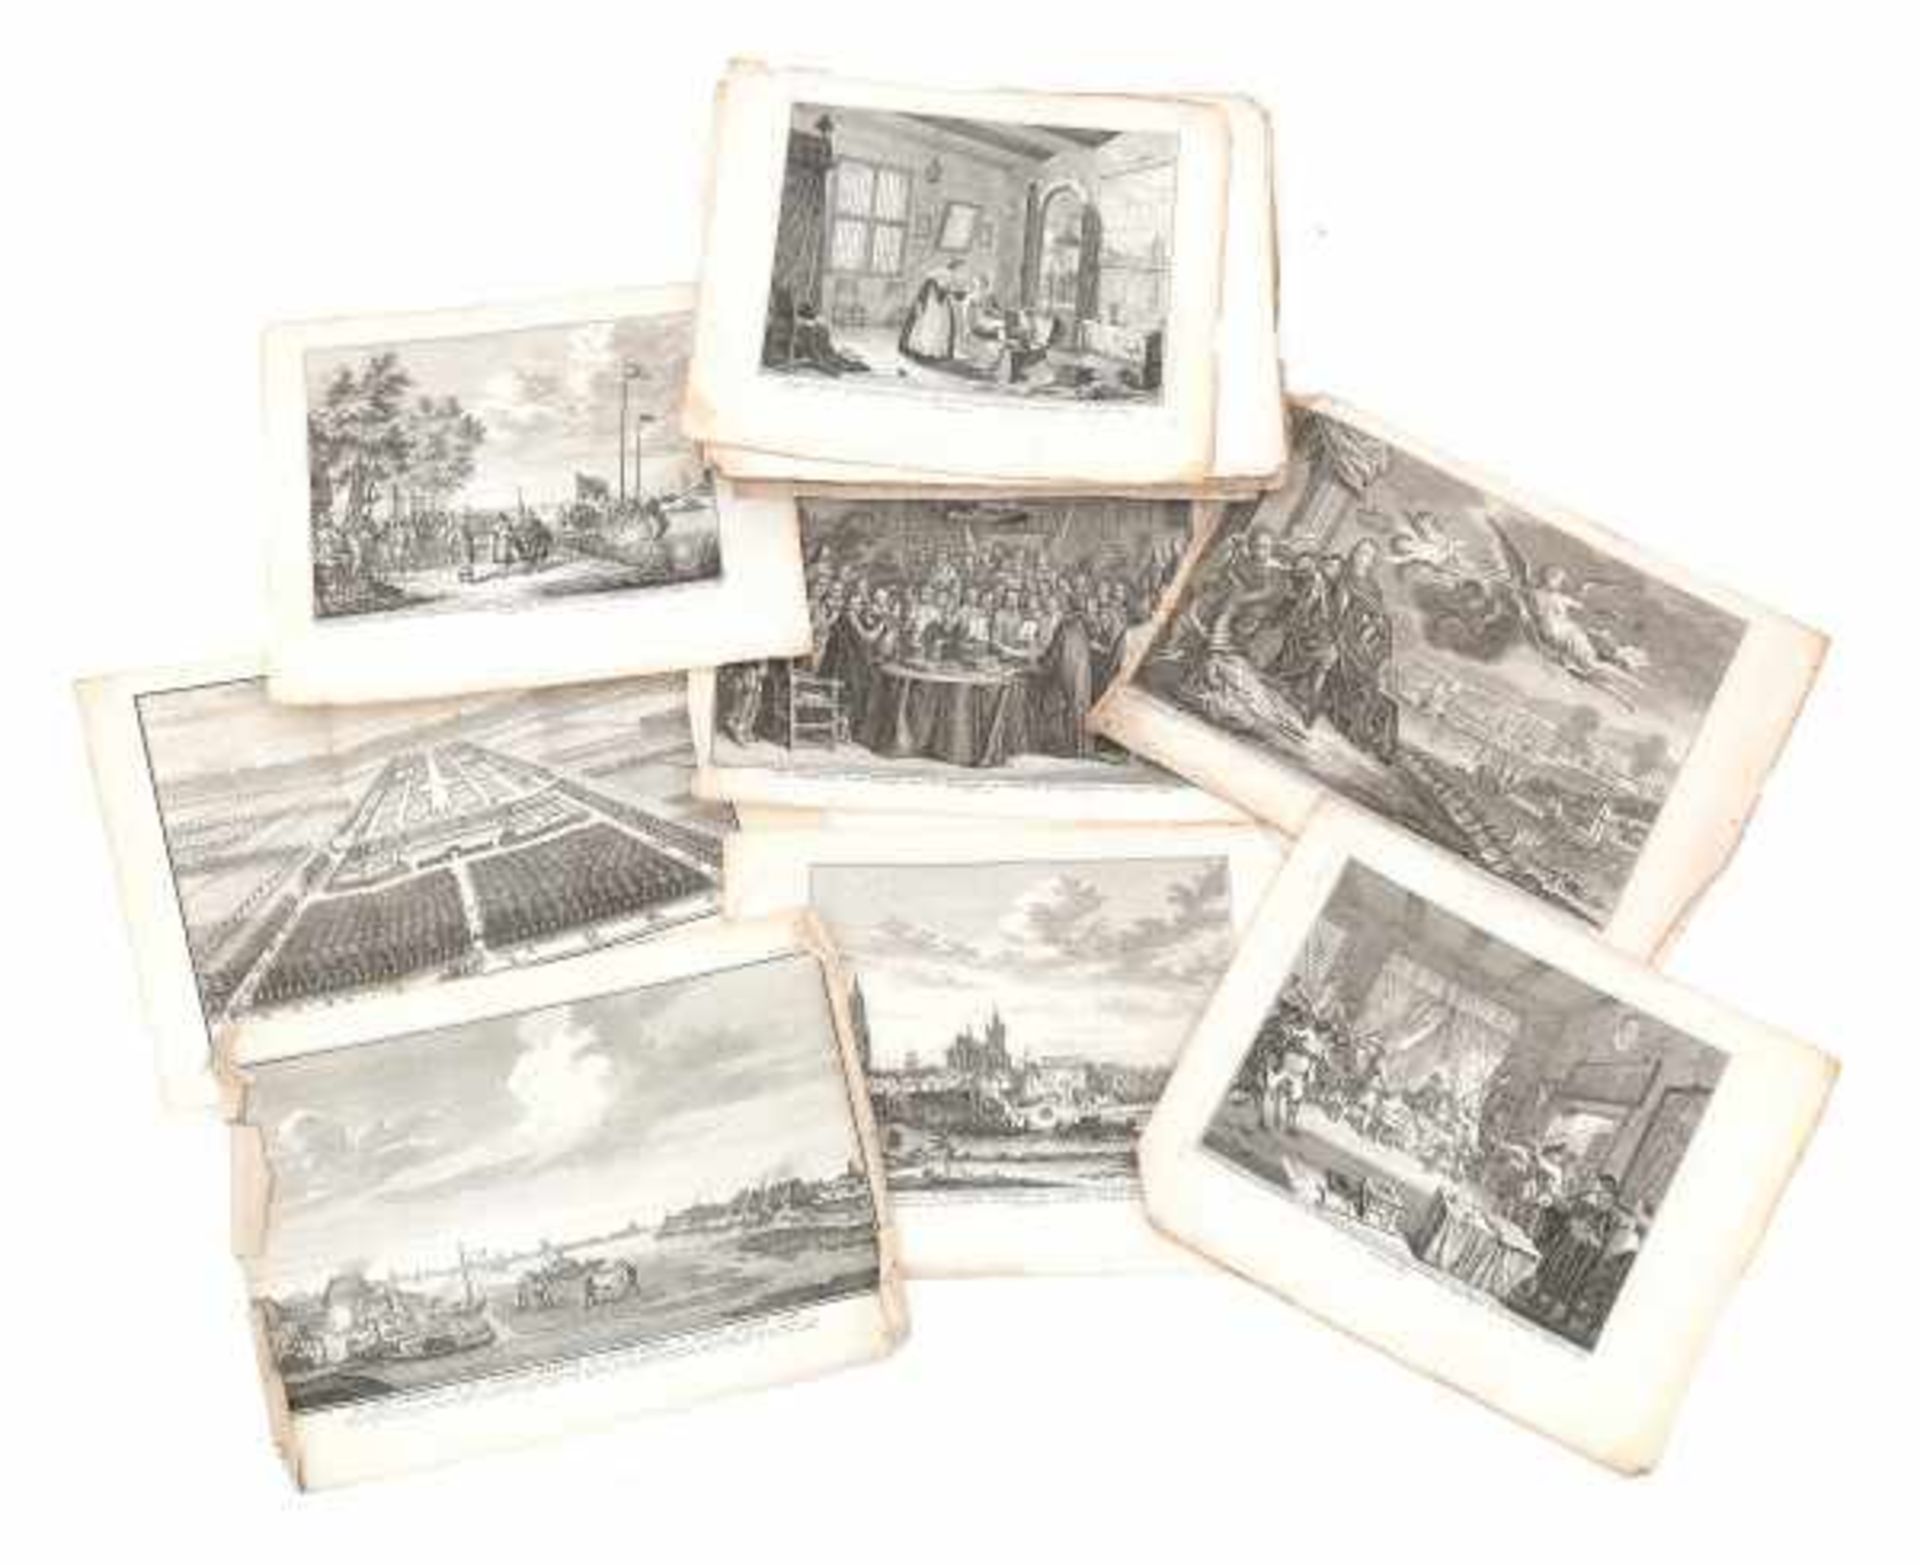 Collection of 39 eighteenth-century historical prints mainly from Wagenaar's Vaderlandse